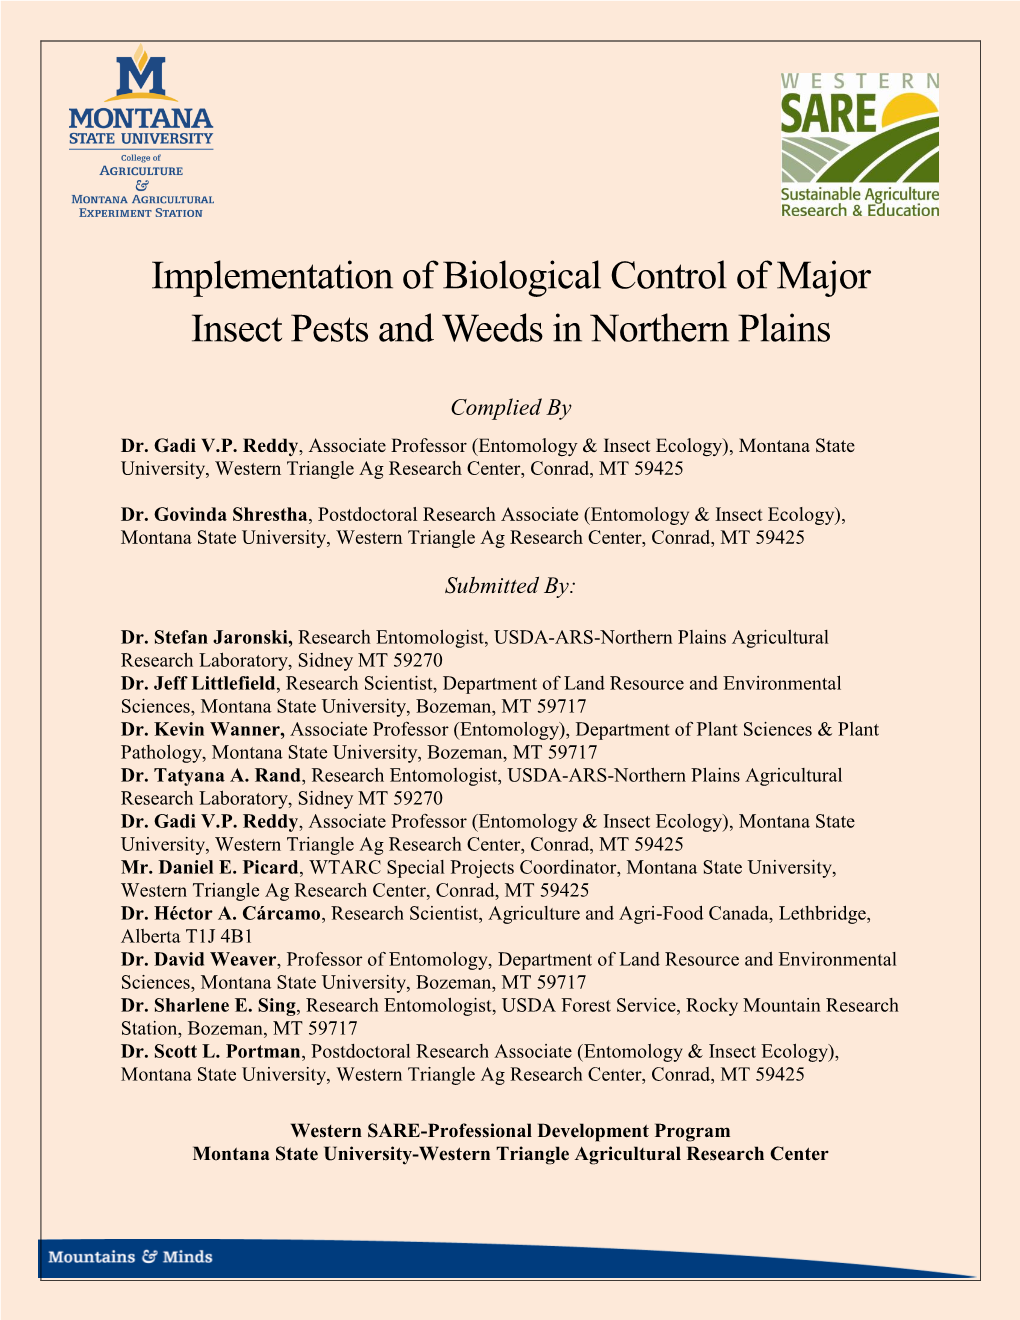 Implementation of Biological Control of Major Insect Pests and Weeds in Northern Plains